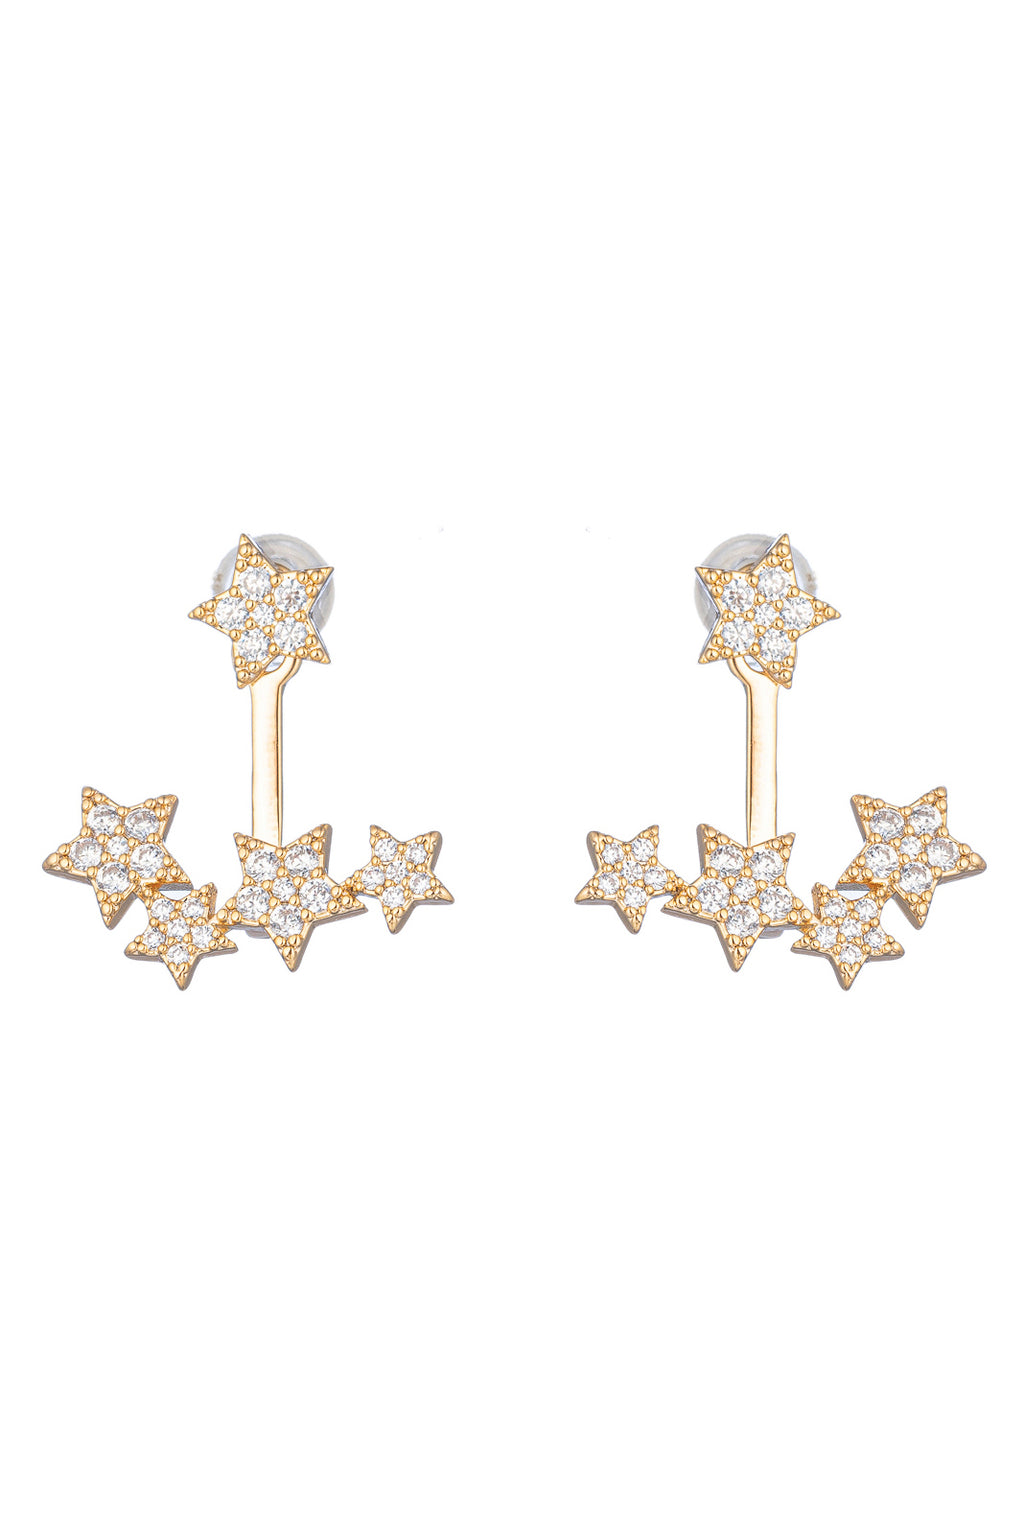 Gold brass star pendant earrings studded with CZ crystals.